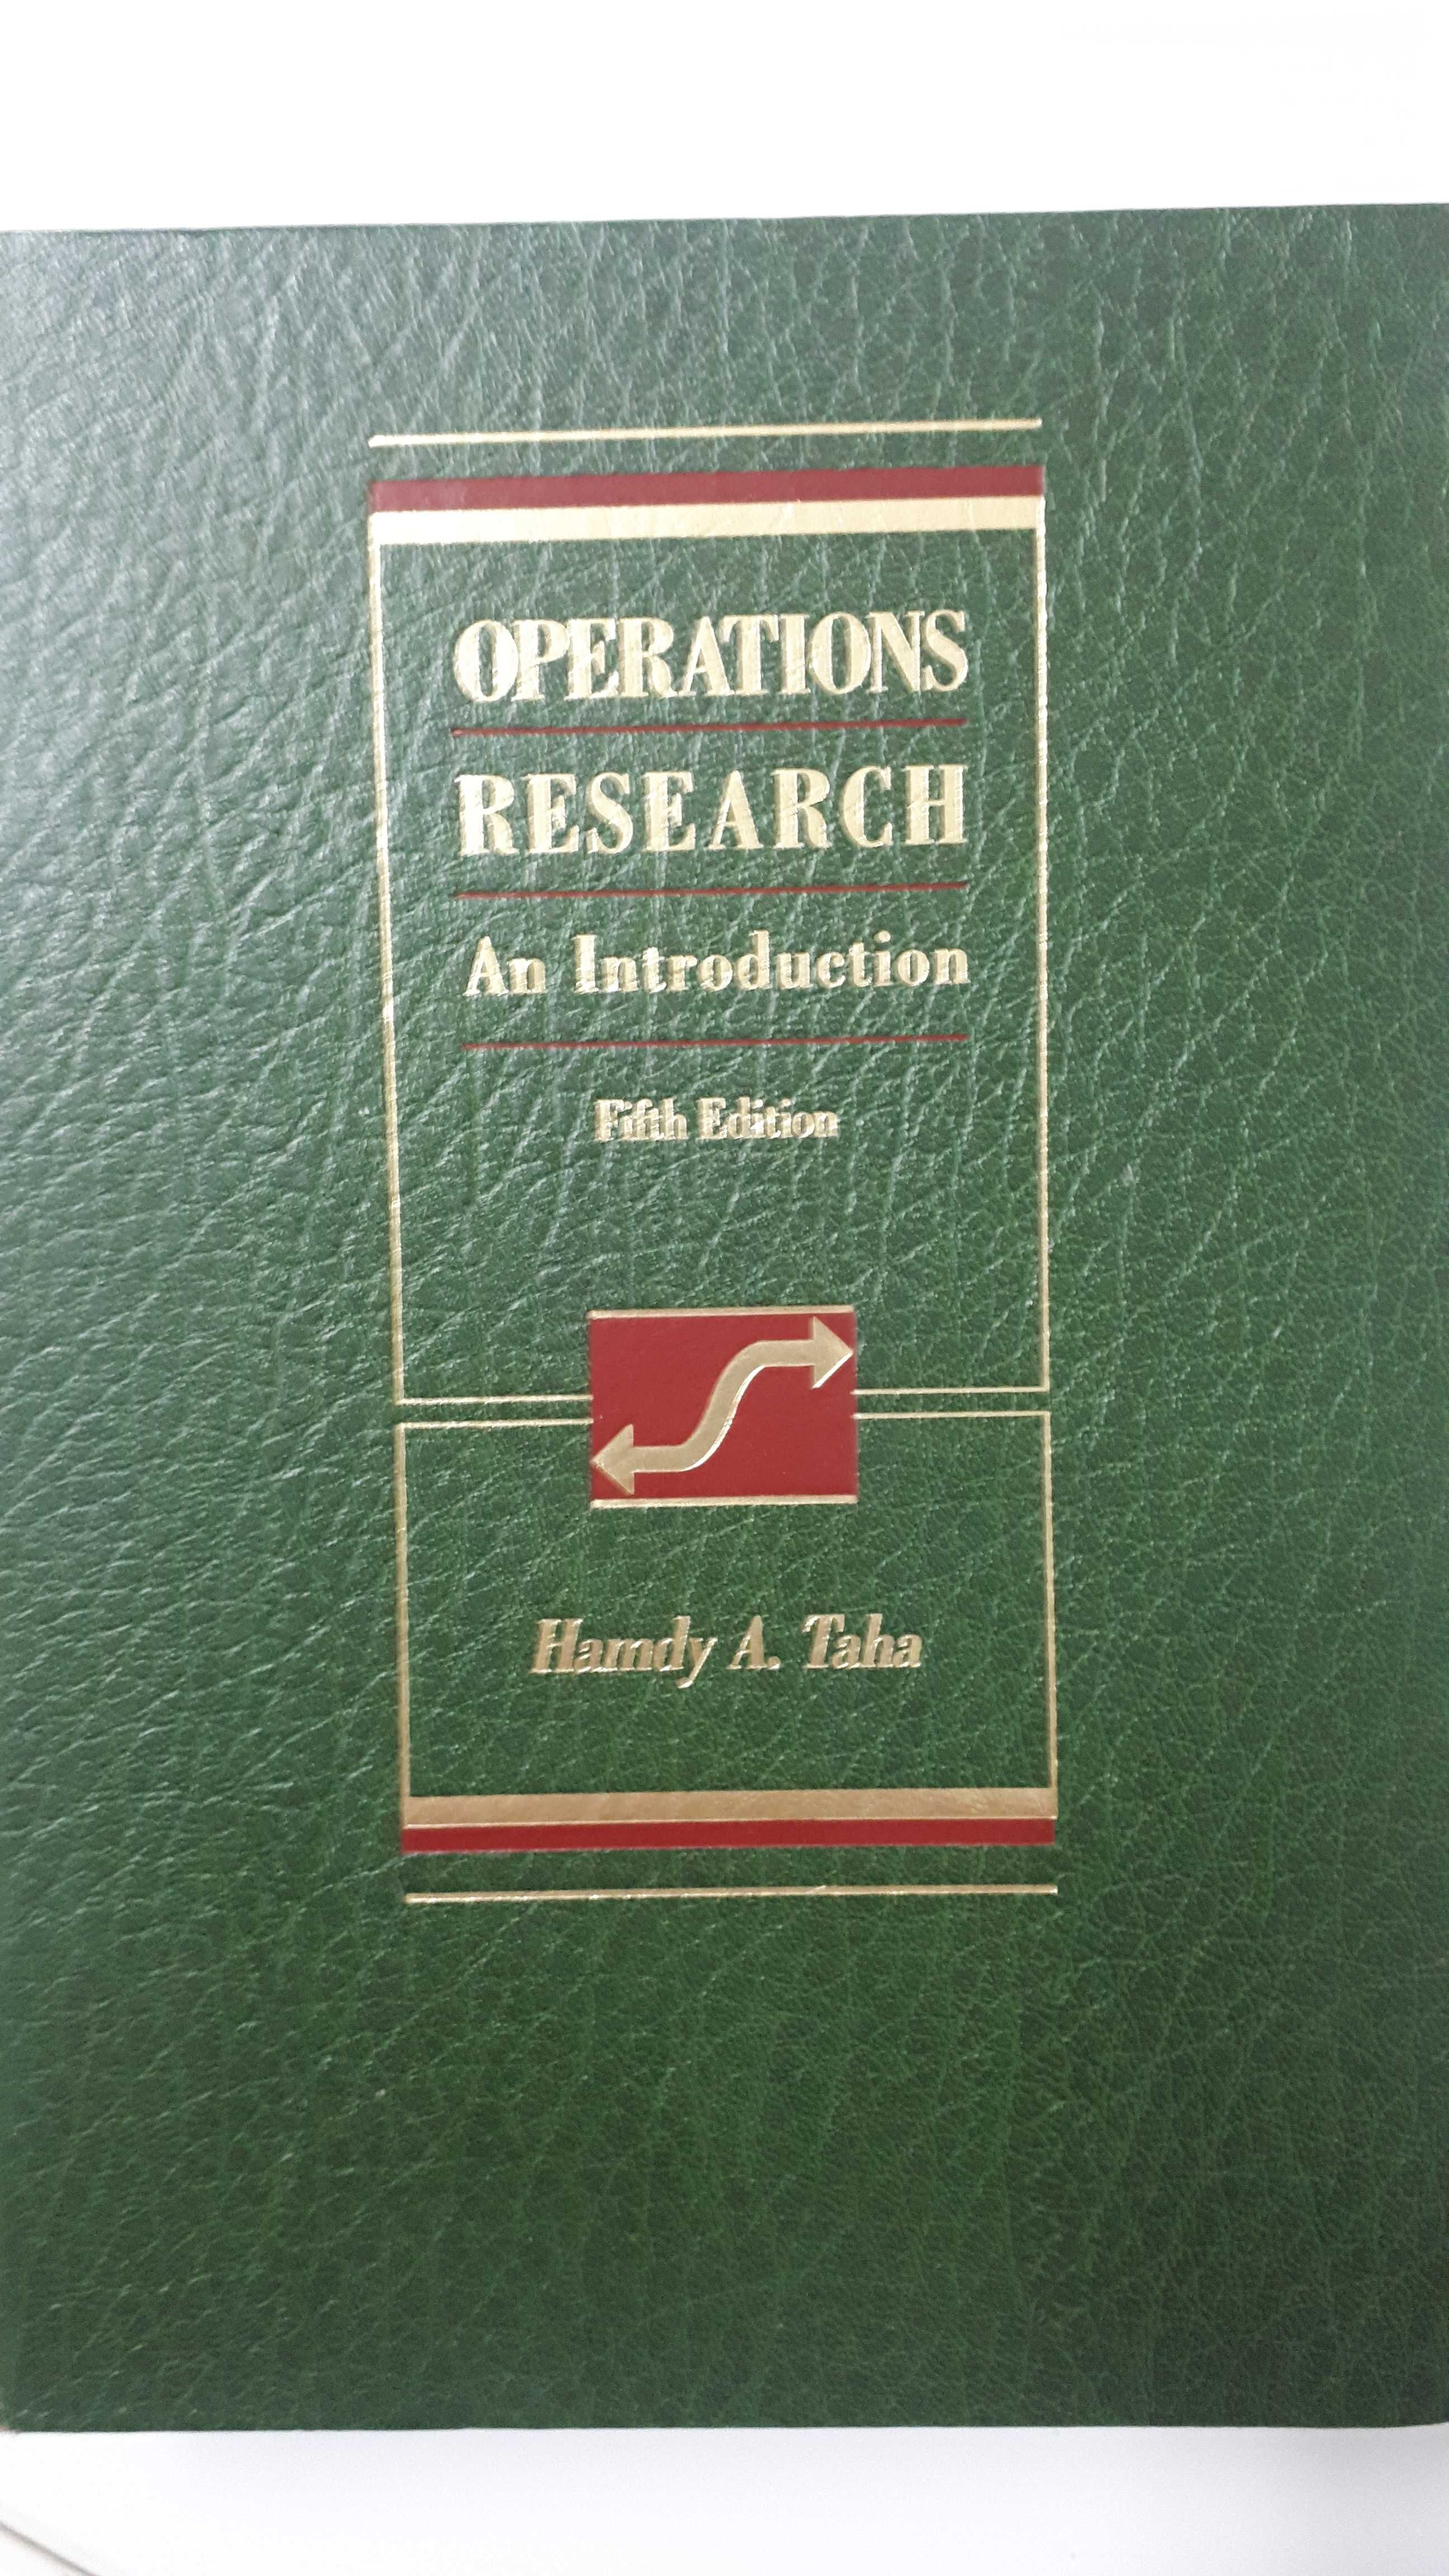 Hamdy A. Taha - Operations Research an Introduction